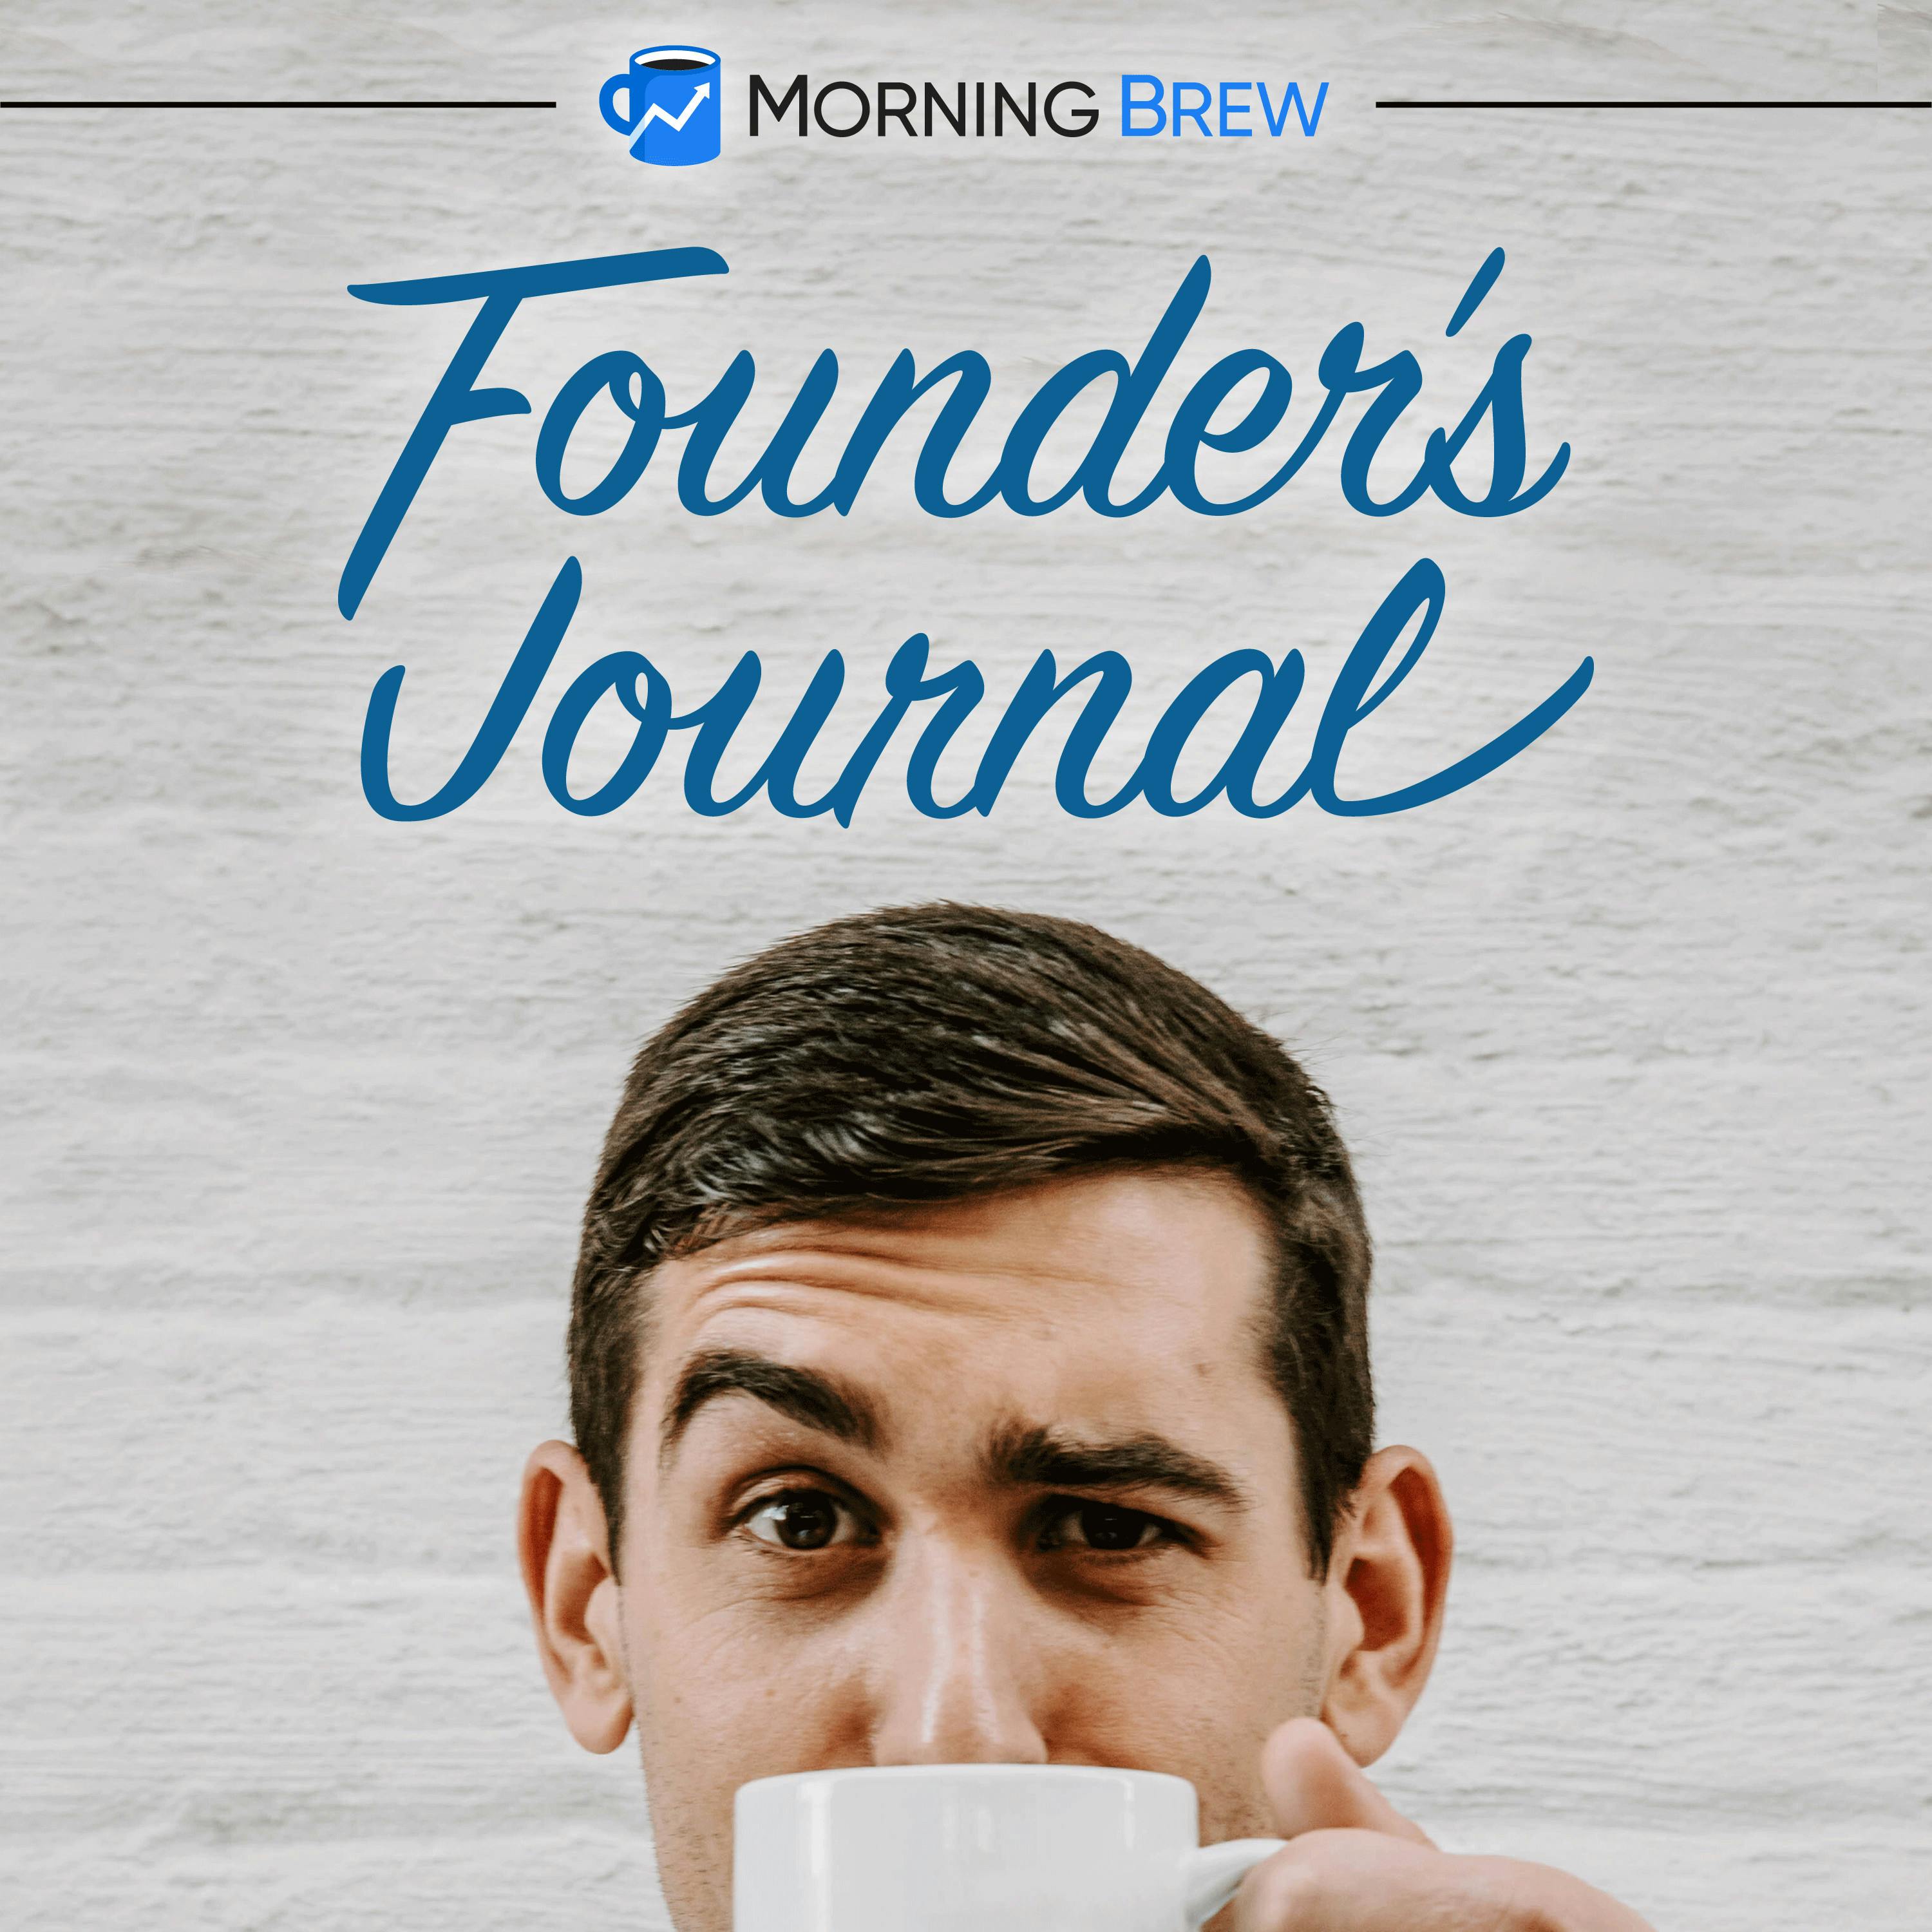 Bonus: Secrets of Networking and Business Connections from The Founder's Journal Image